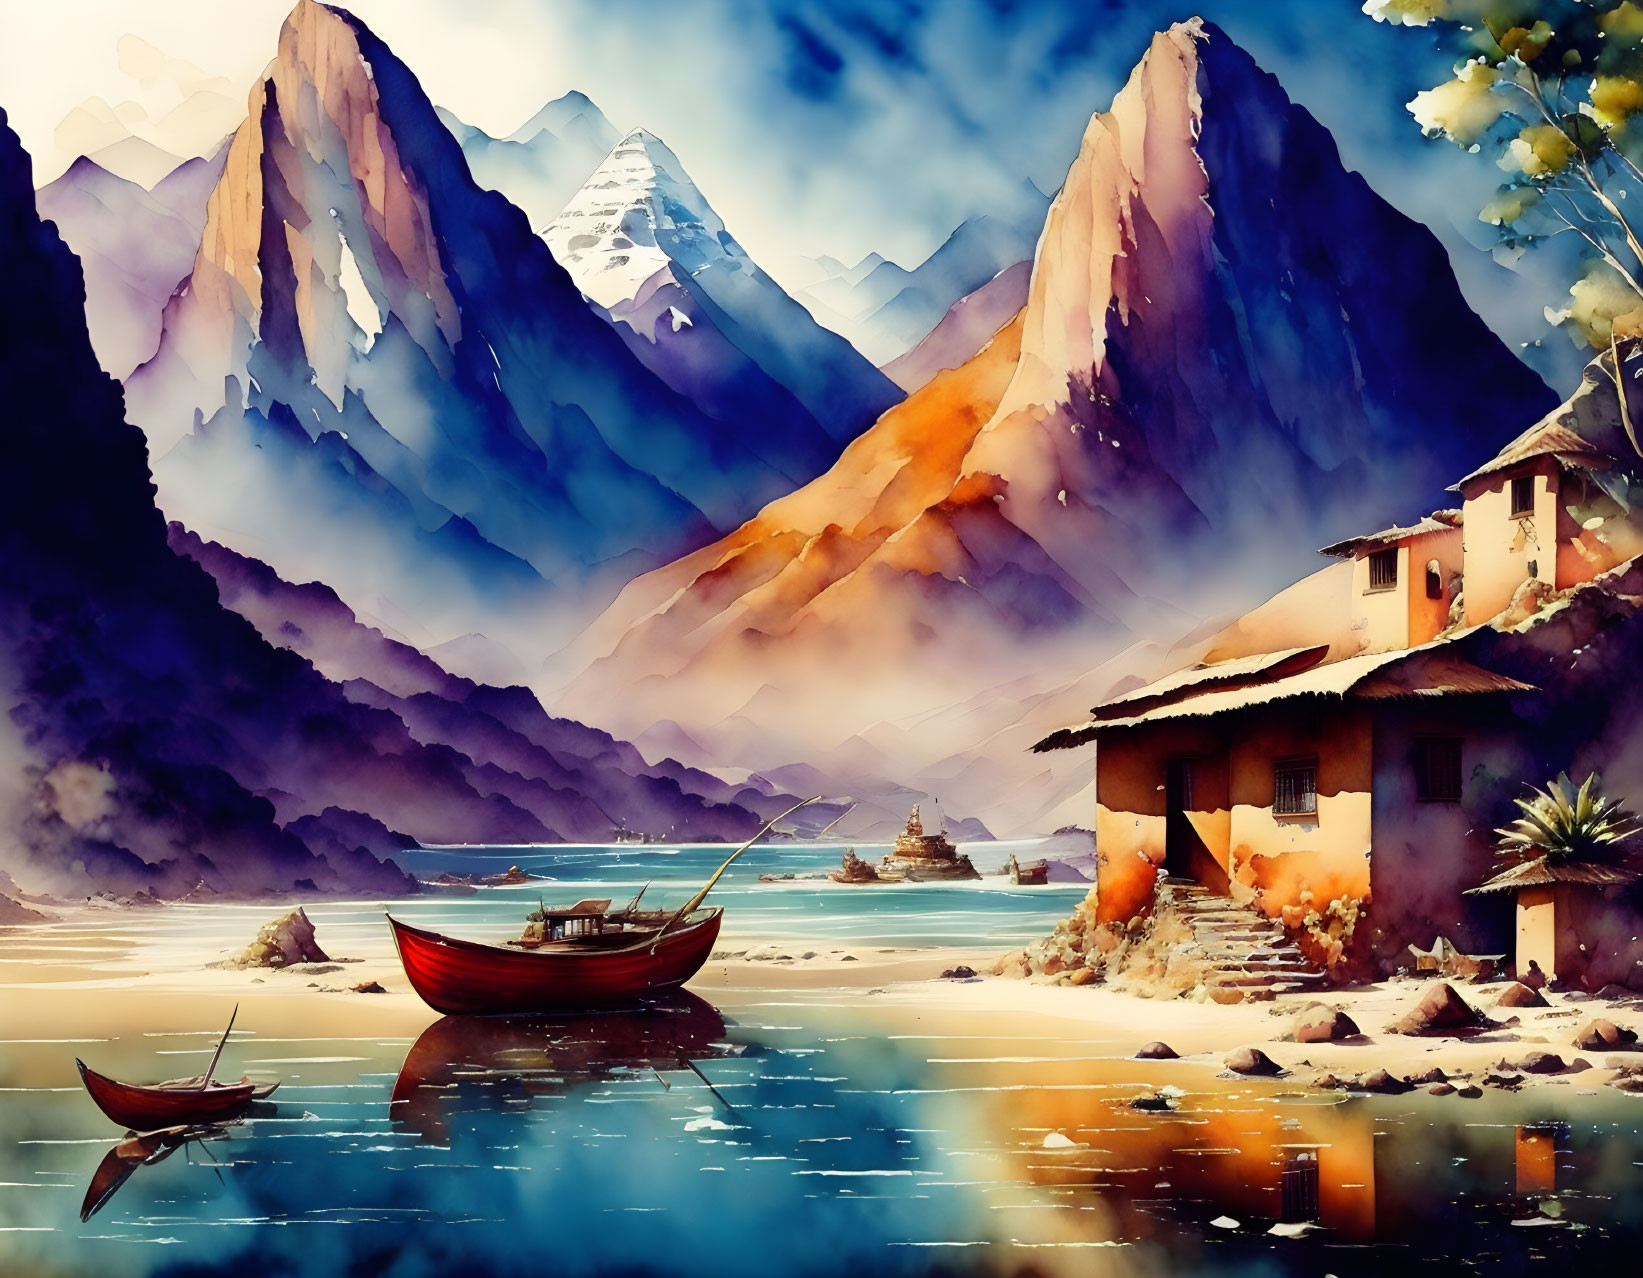 Scenic lakeside view with traditional house, boat, and misty mountains